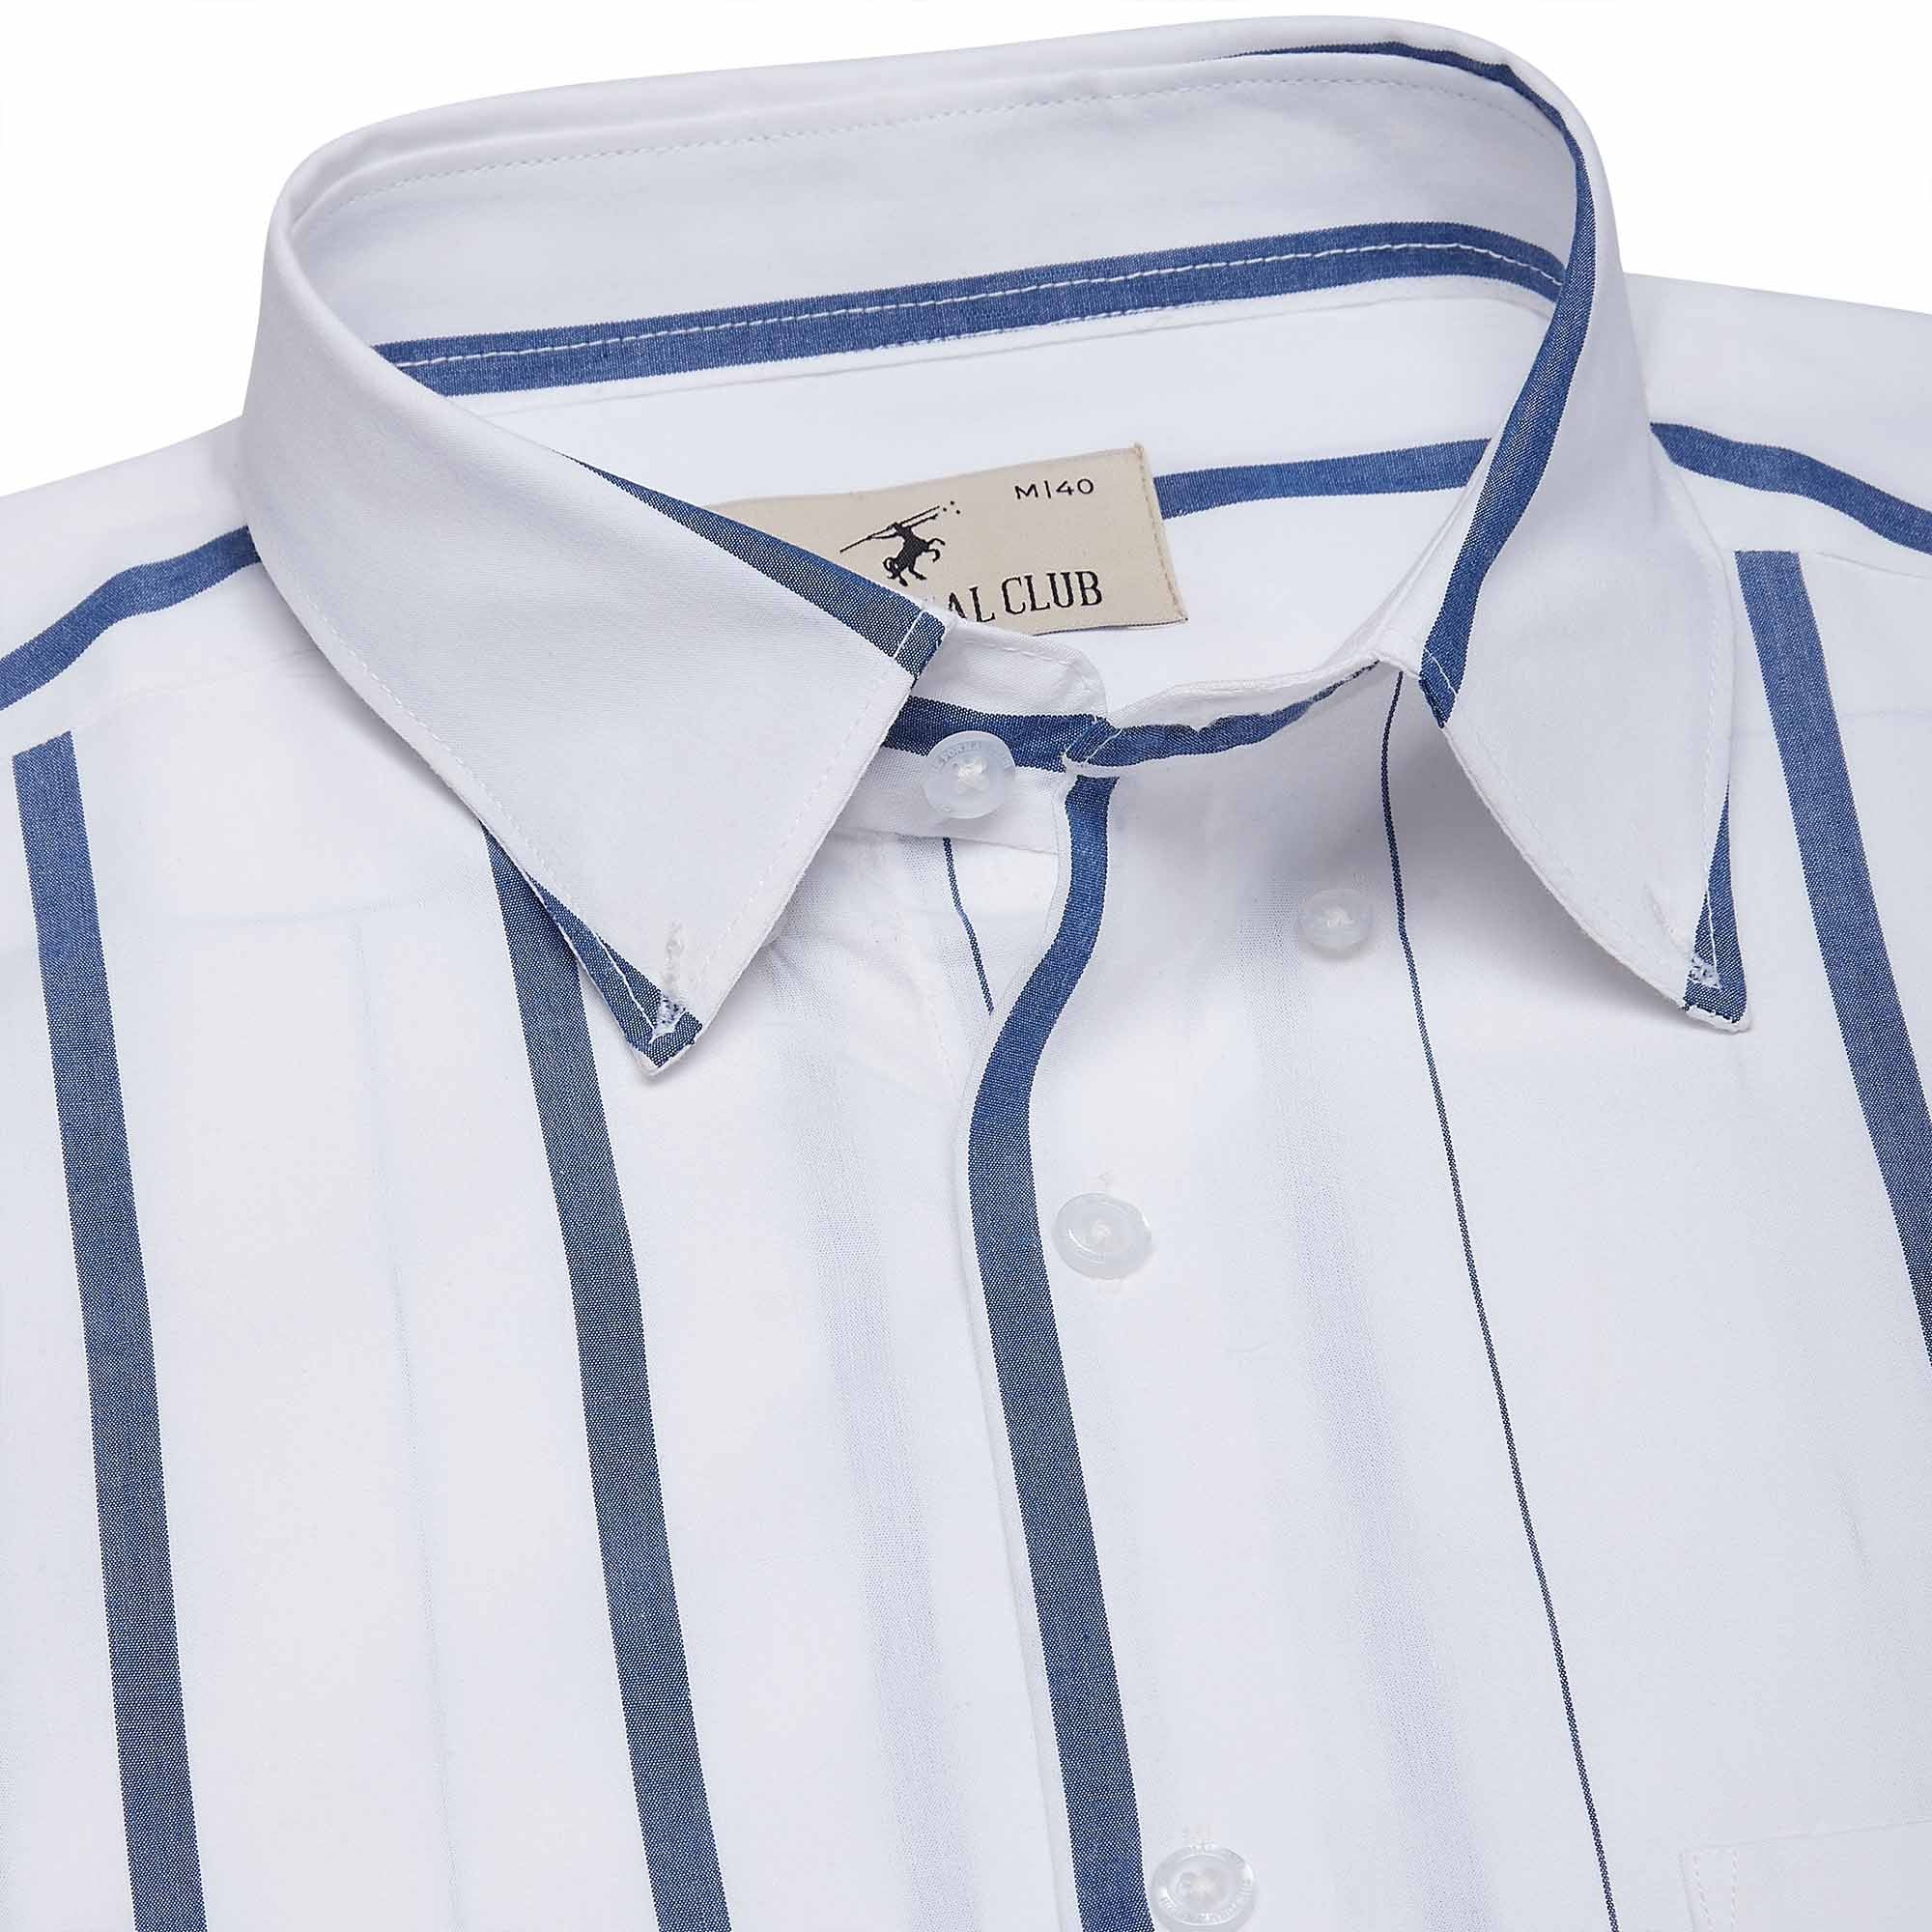 Skyline Cotton Stripes Shirt In White And Blue - The Formal Club